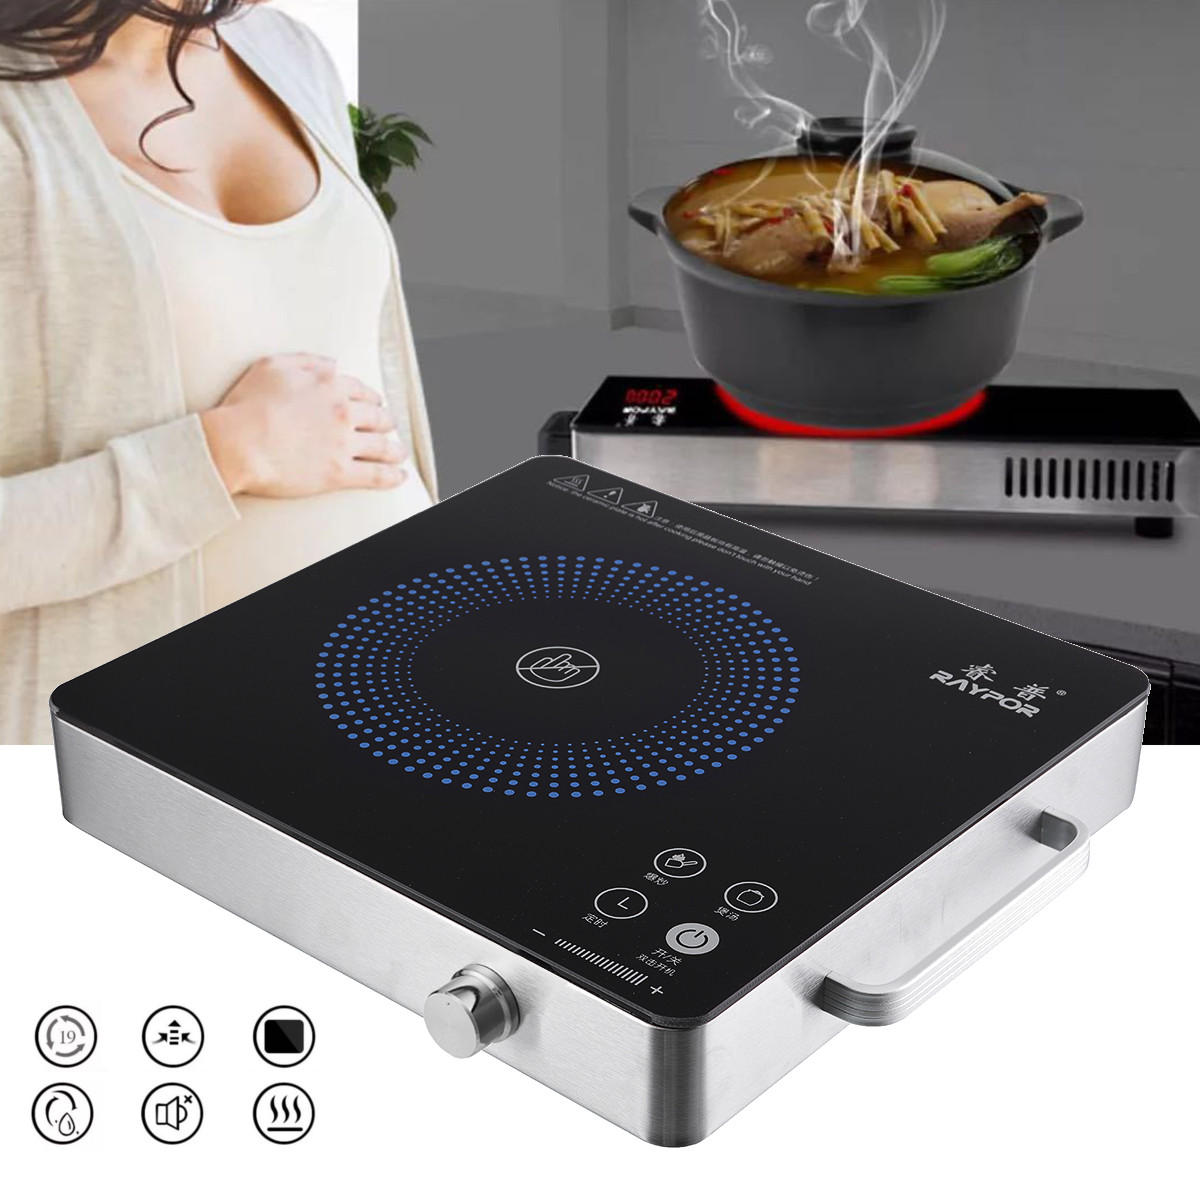 2200W-Electric-Induction-Cooker-Cooktop-Kitchen-Burner-Portable-Home-Countertop-Cooker-1383671